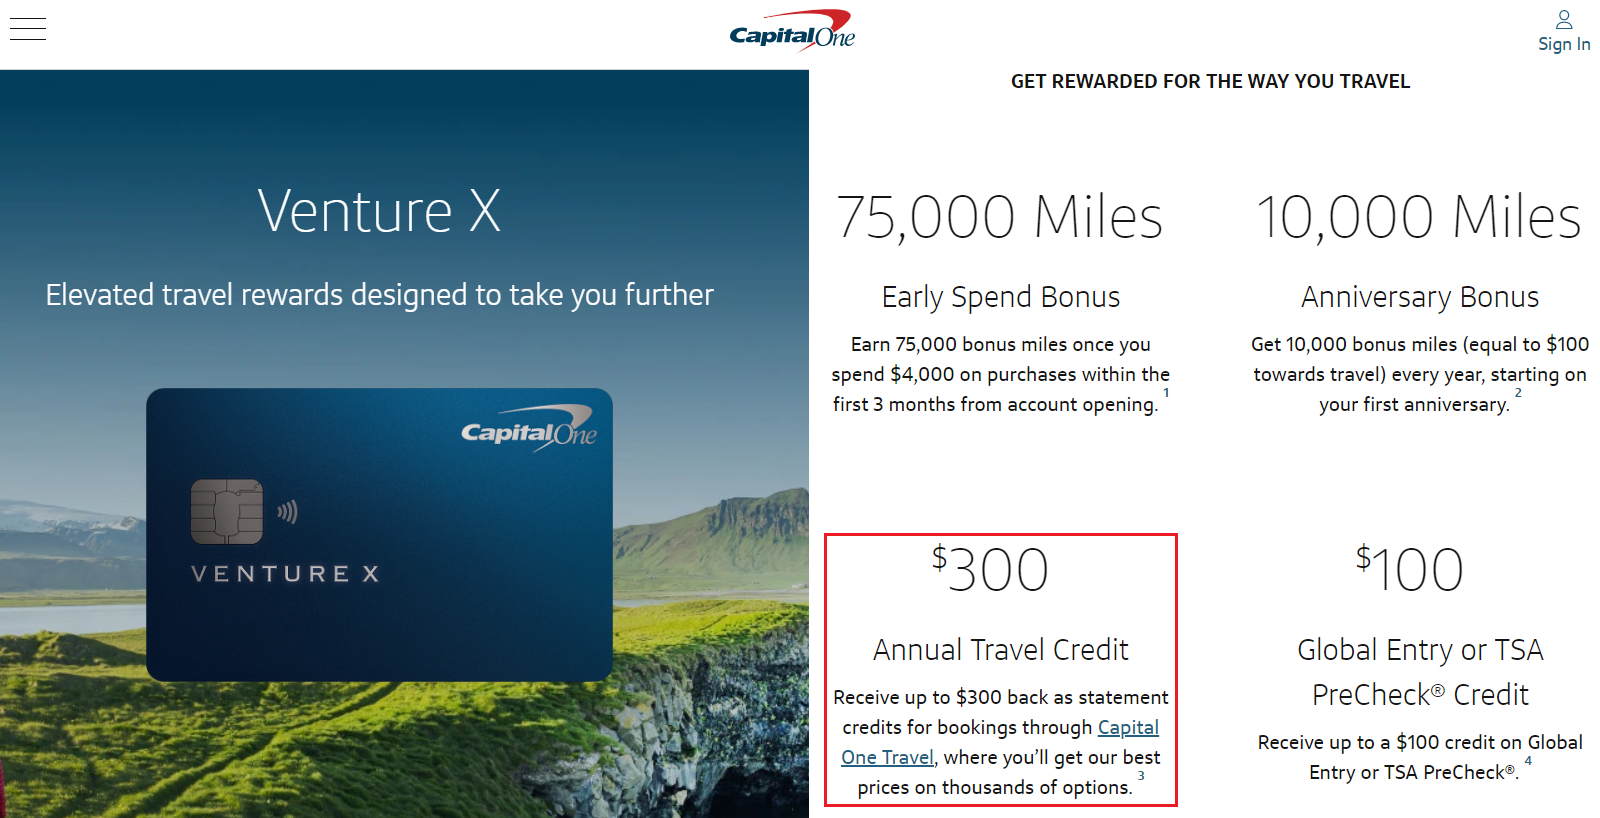 Booking a Trip With Capital One Travel